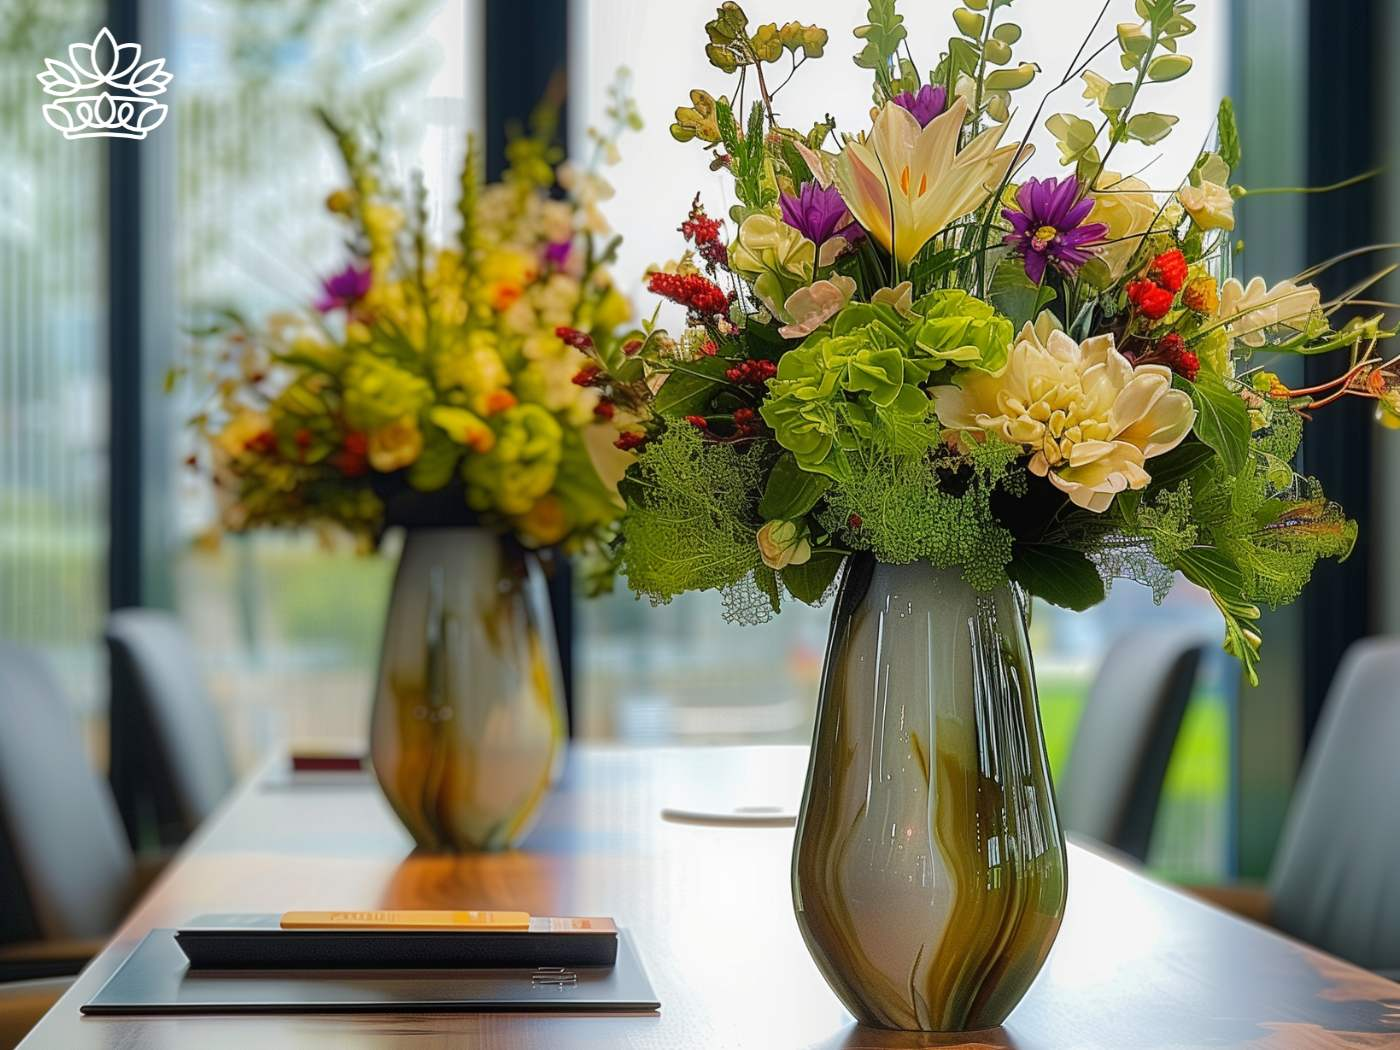 Elegant boardroom setup featuring vibrant floral arrangements in sleek vases, enhancing corporate decor, with arrangements from Fabulous Flowers and Gifts.